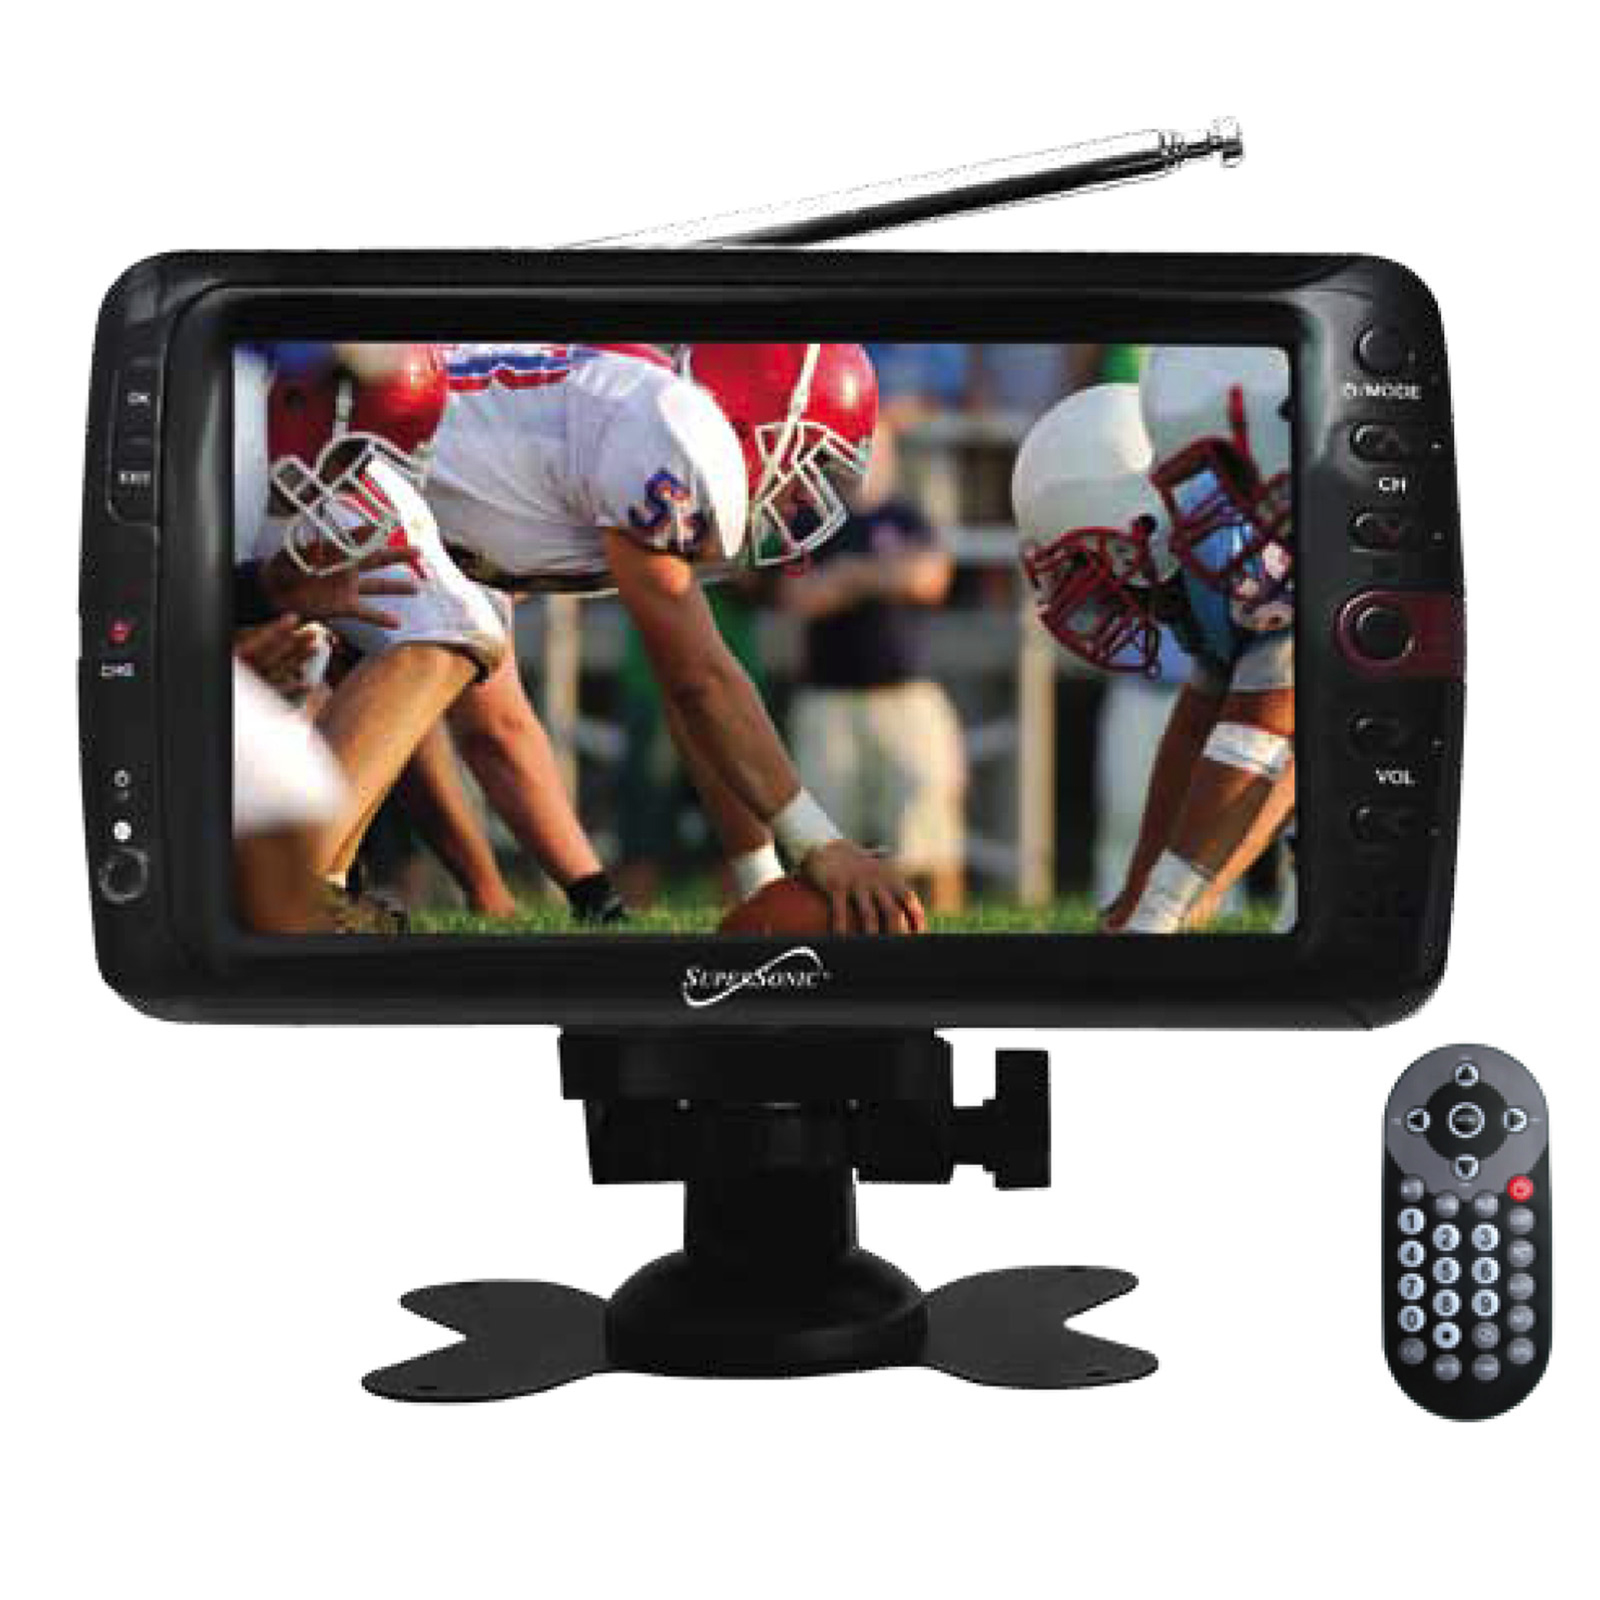 SHARPERVIEW 97080760M 7" 480p 60Hz Portable LCD TV with ATSC Digital Tuner